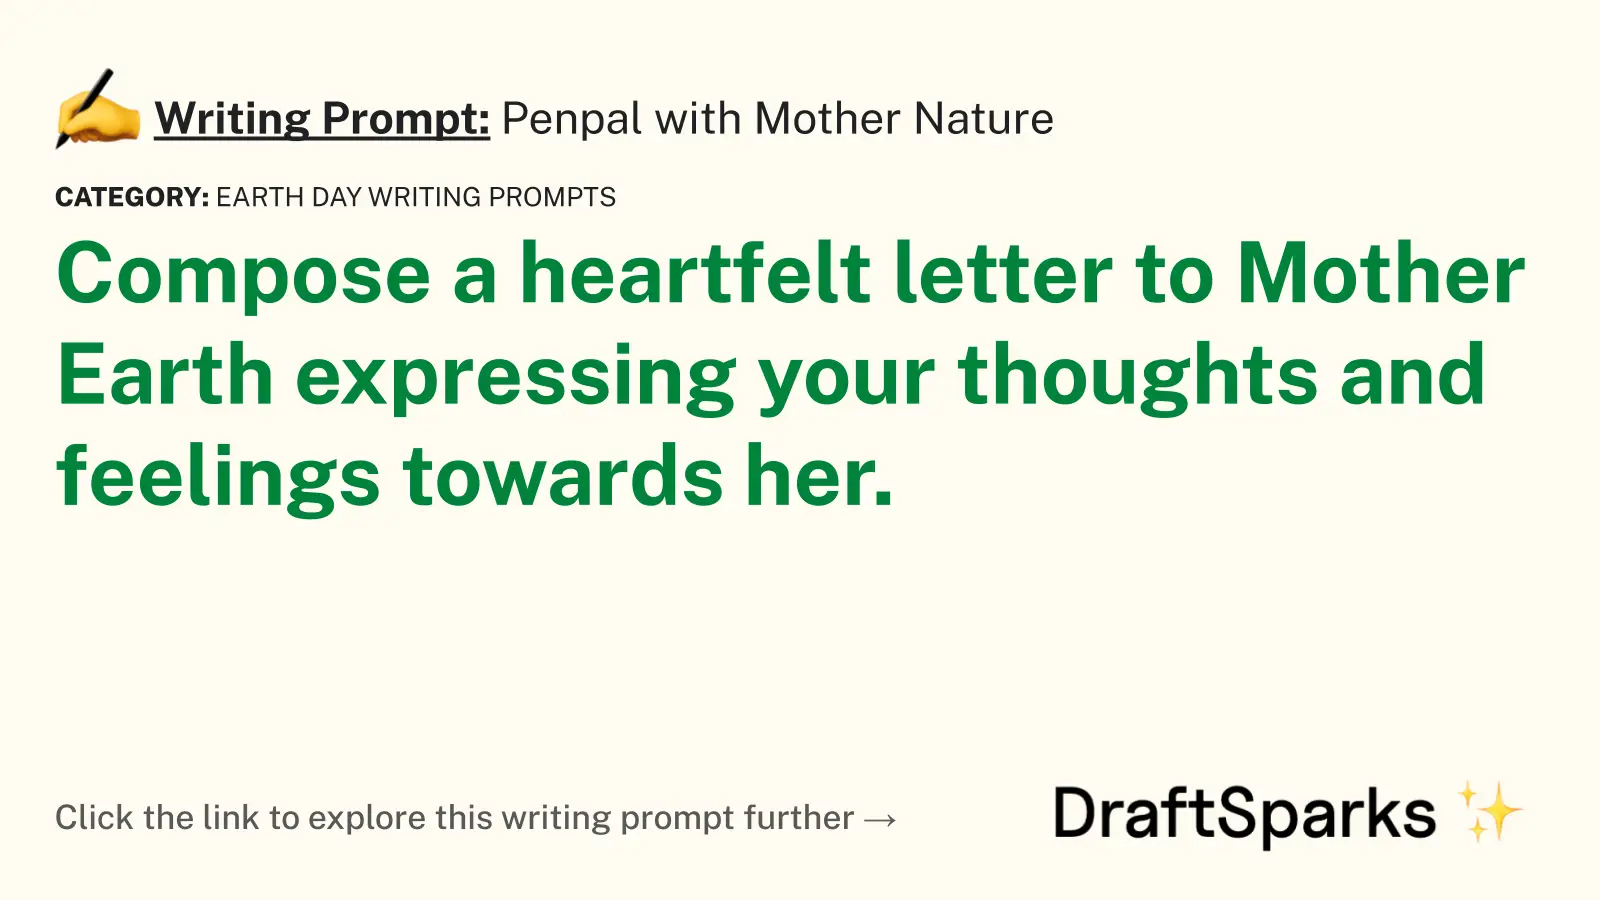 Penpal with Mother Nature